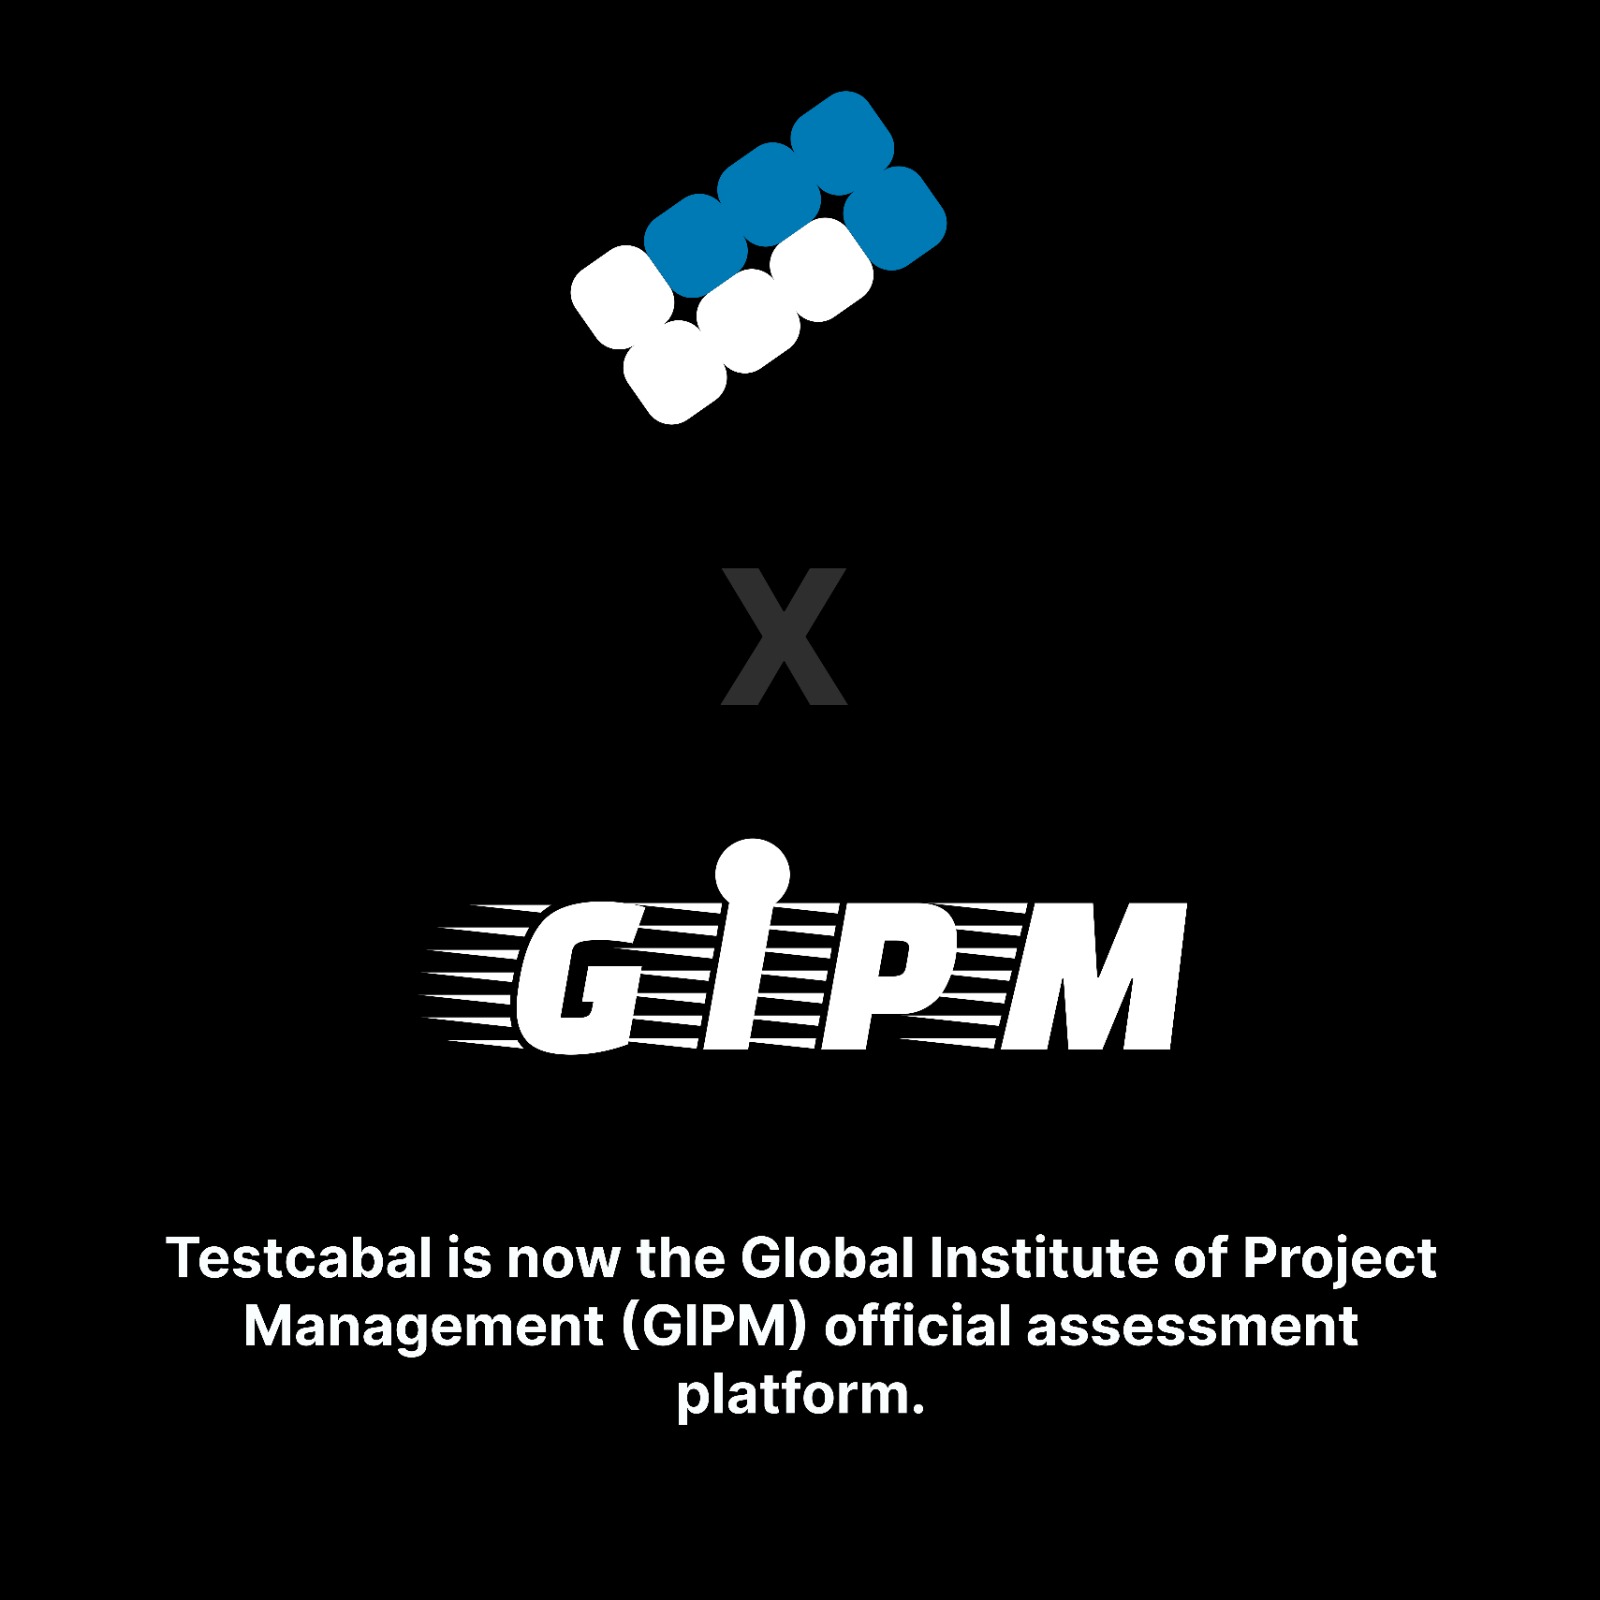 Global Institute of Project Management